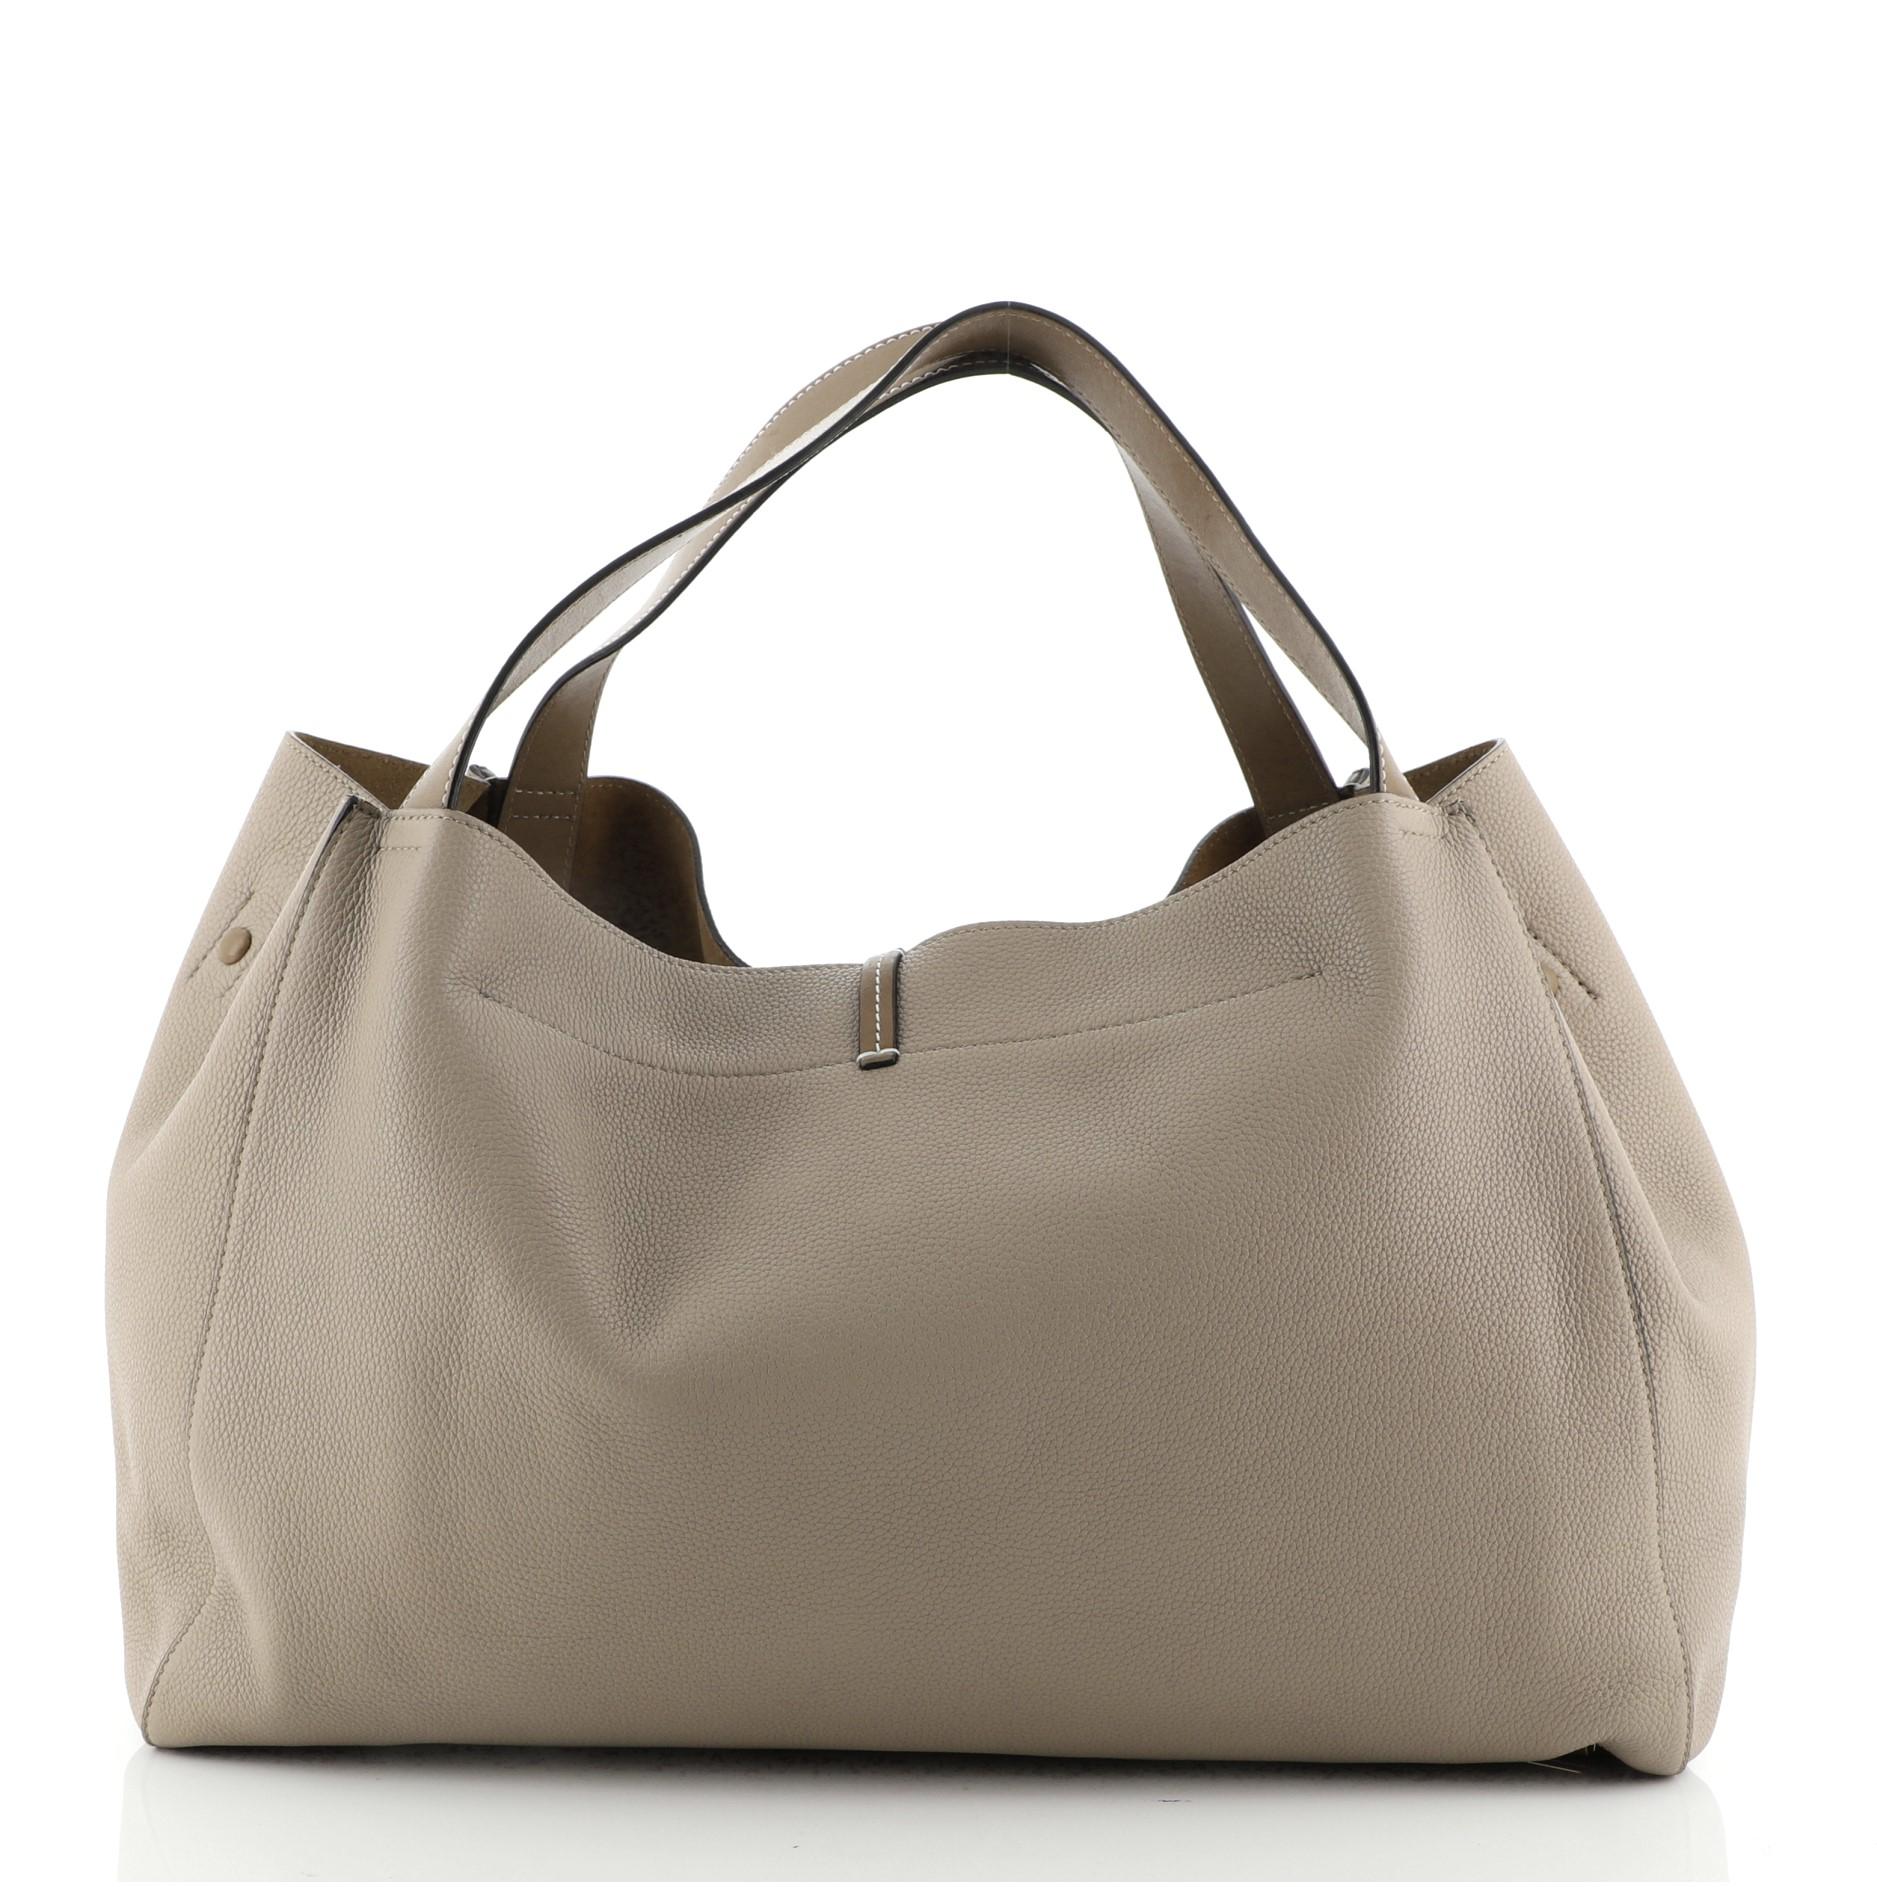 Loewe Barcelona Tote Leather
Neutral

Condition Details: Light scuffs on handles and in interior, scratches on hardware.

51940MSC

Height 10